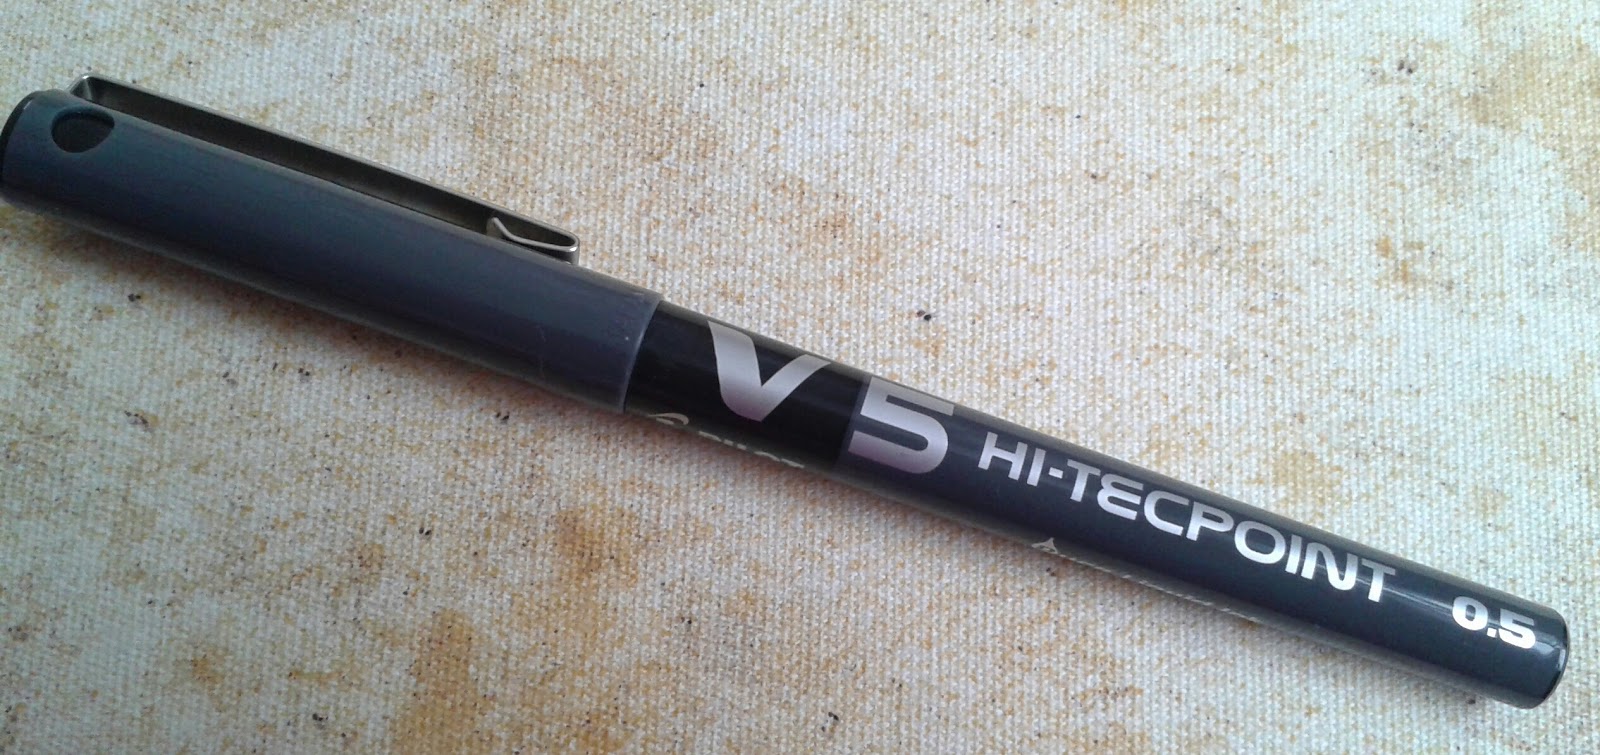 Pen Collection geekery: Pilot V5 Hi-Tecpoint Liquid Ink Rollerball